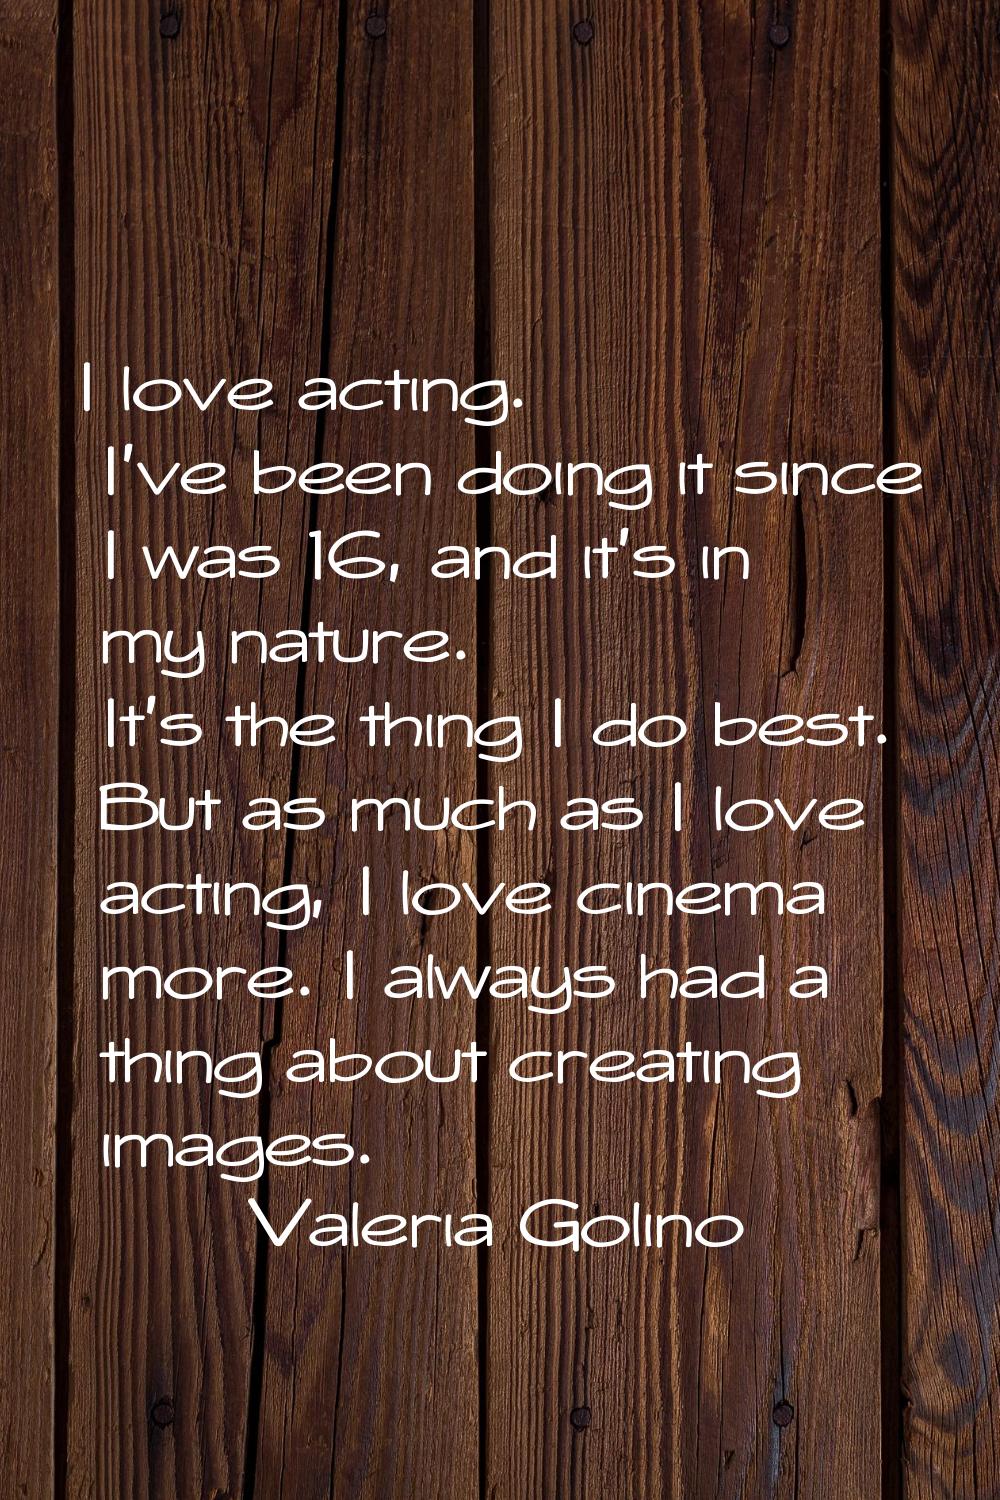 I love acting. I've been doing it since I was 16, and it's in my nature. It's the thing I do best. 